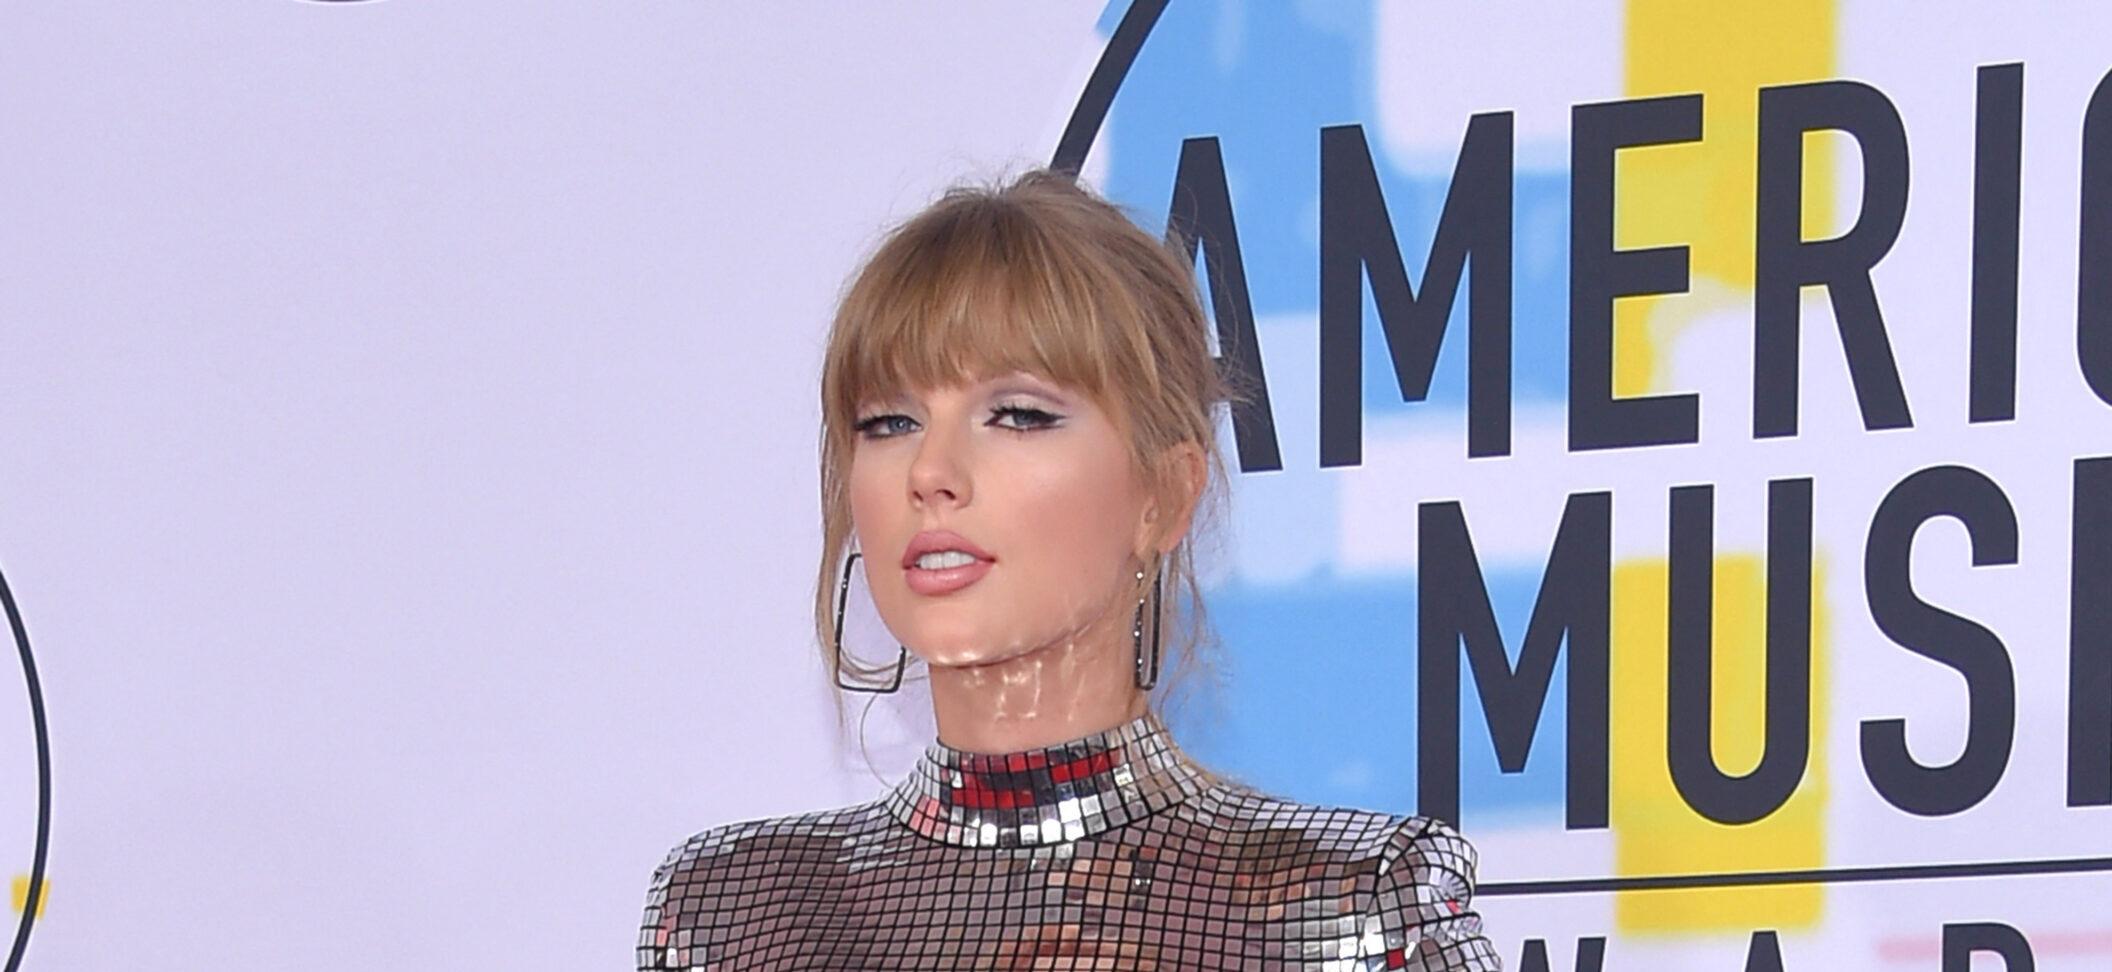 Taylor Swift at the 2018 American Music Awards